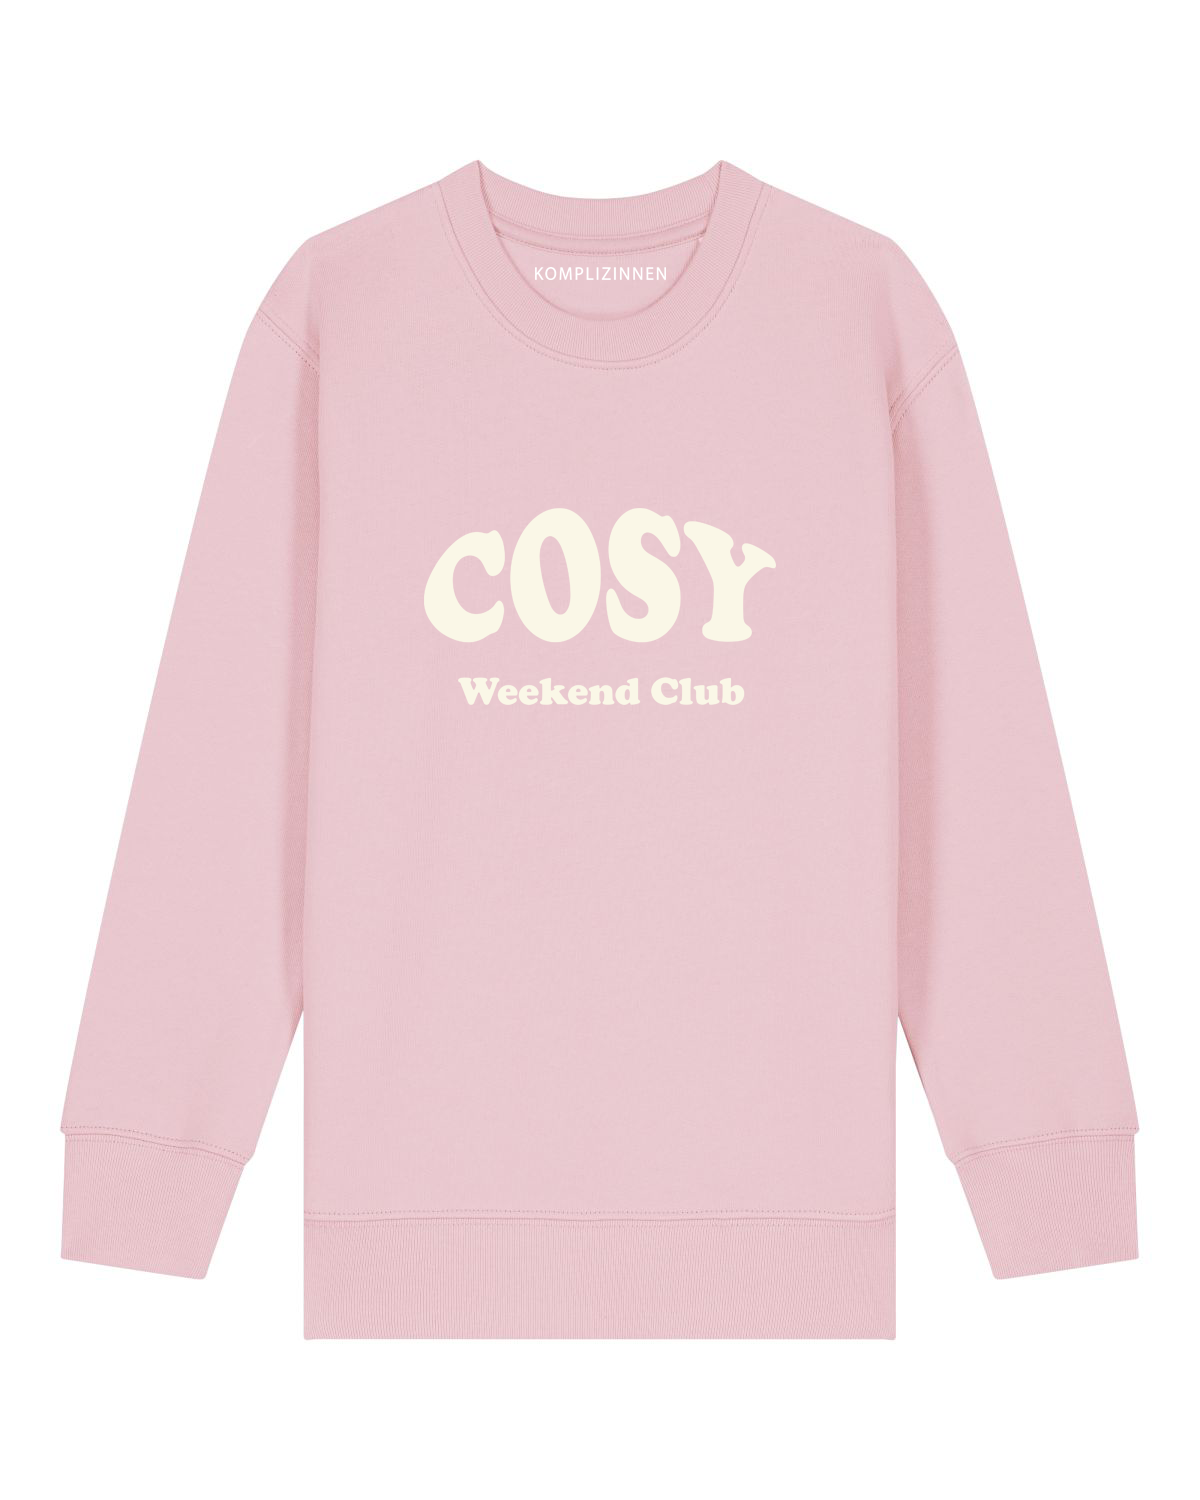 Cosy Sweater Kids pink